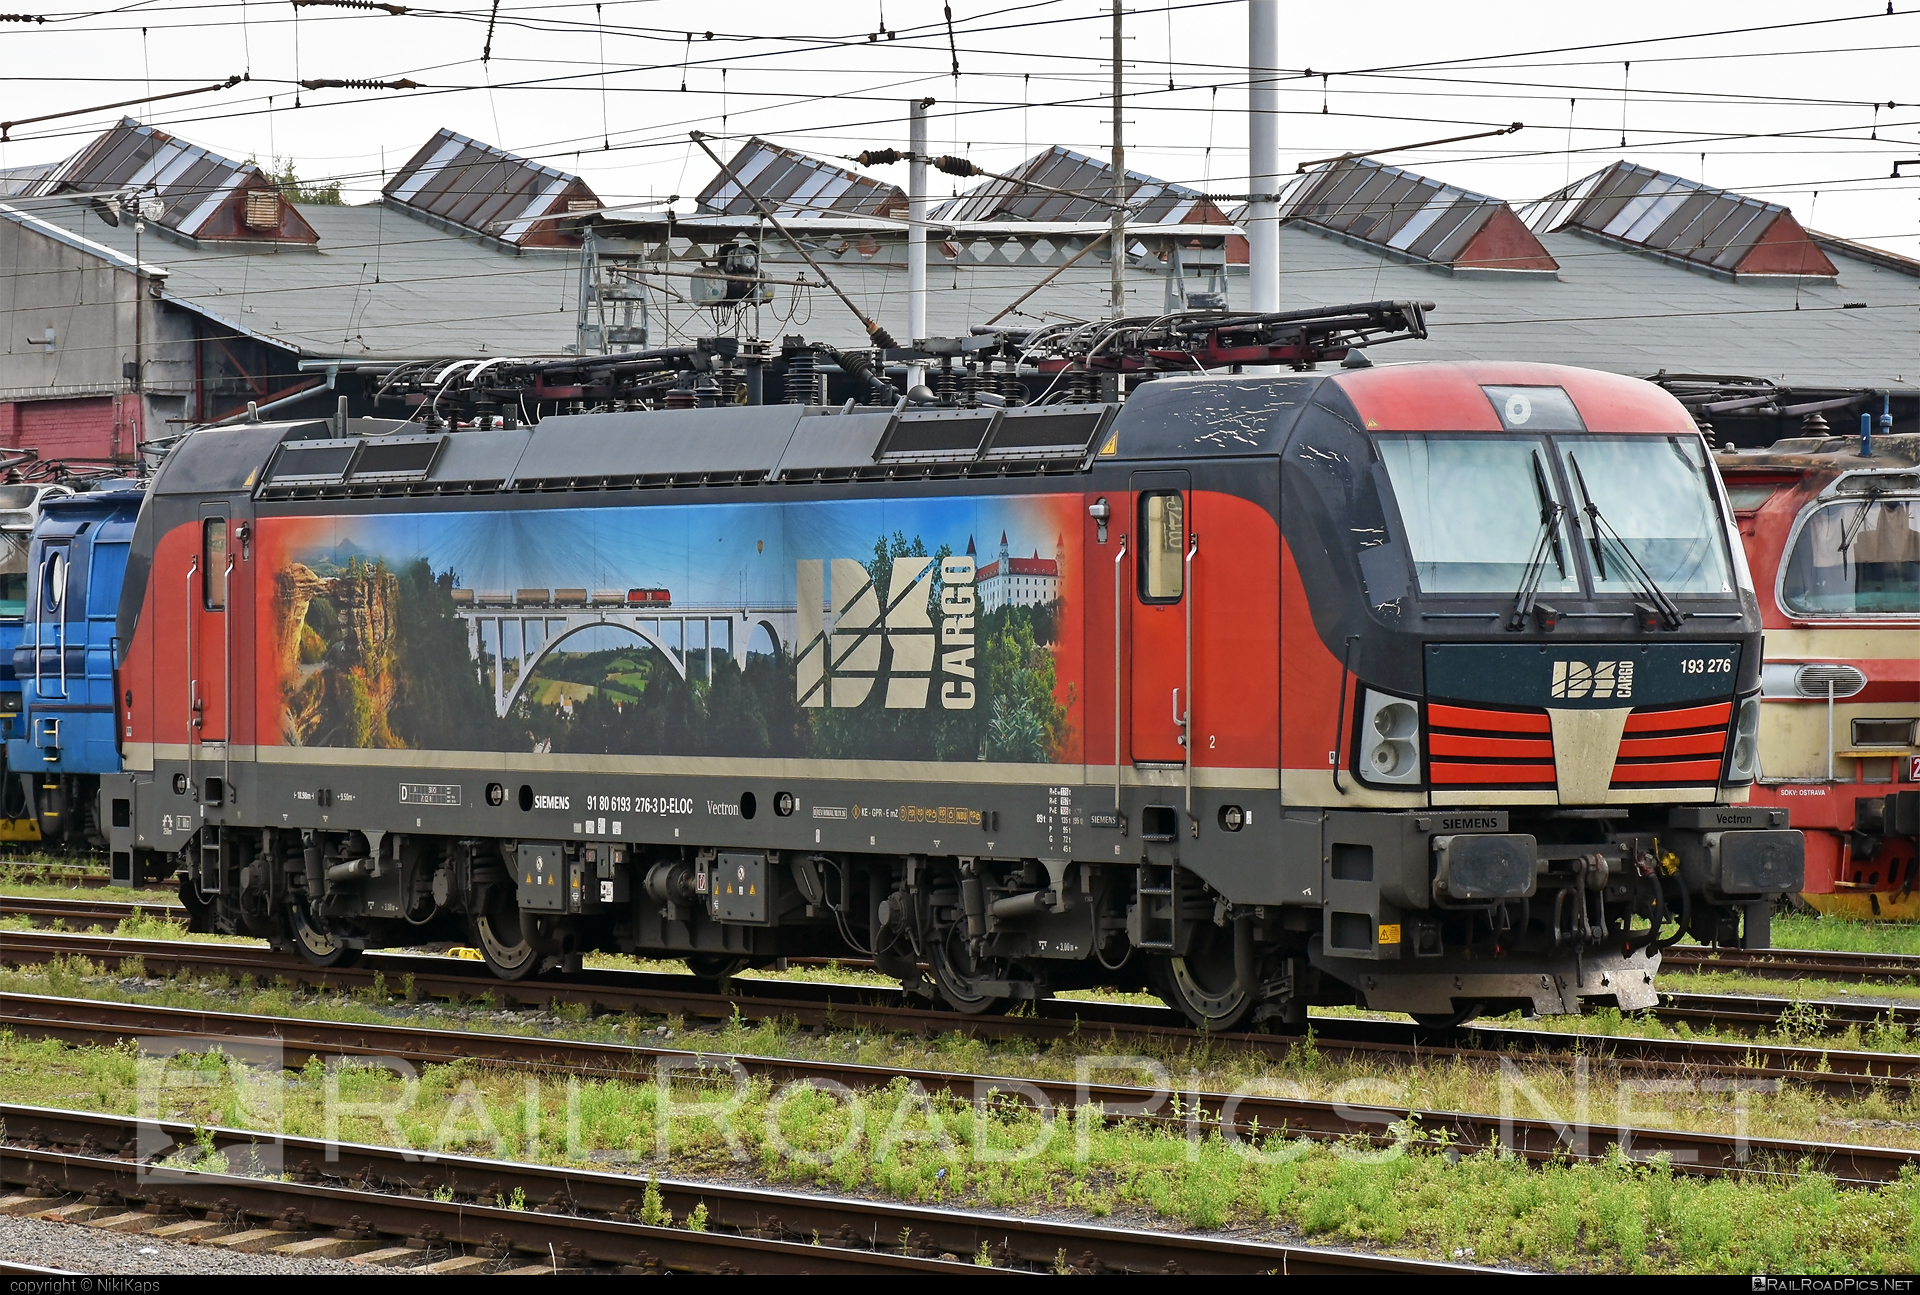 Siemens Vectron MS - 193 276 operated by IDS CARGO a. s. #ell #ellgermany #eloc #europeanlocomotiveleasing #idsc #idscargo #siemens #siemensVectron #siemensVectronMS #vectron #vectronMS